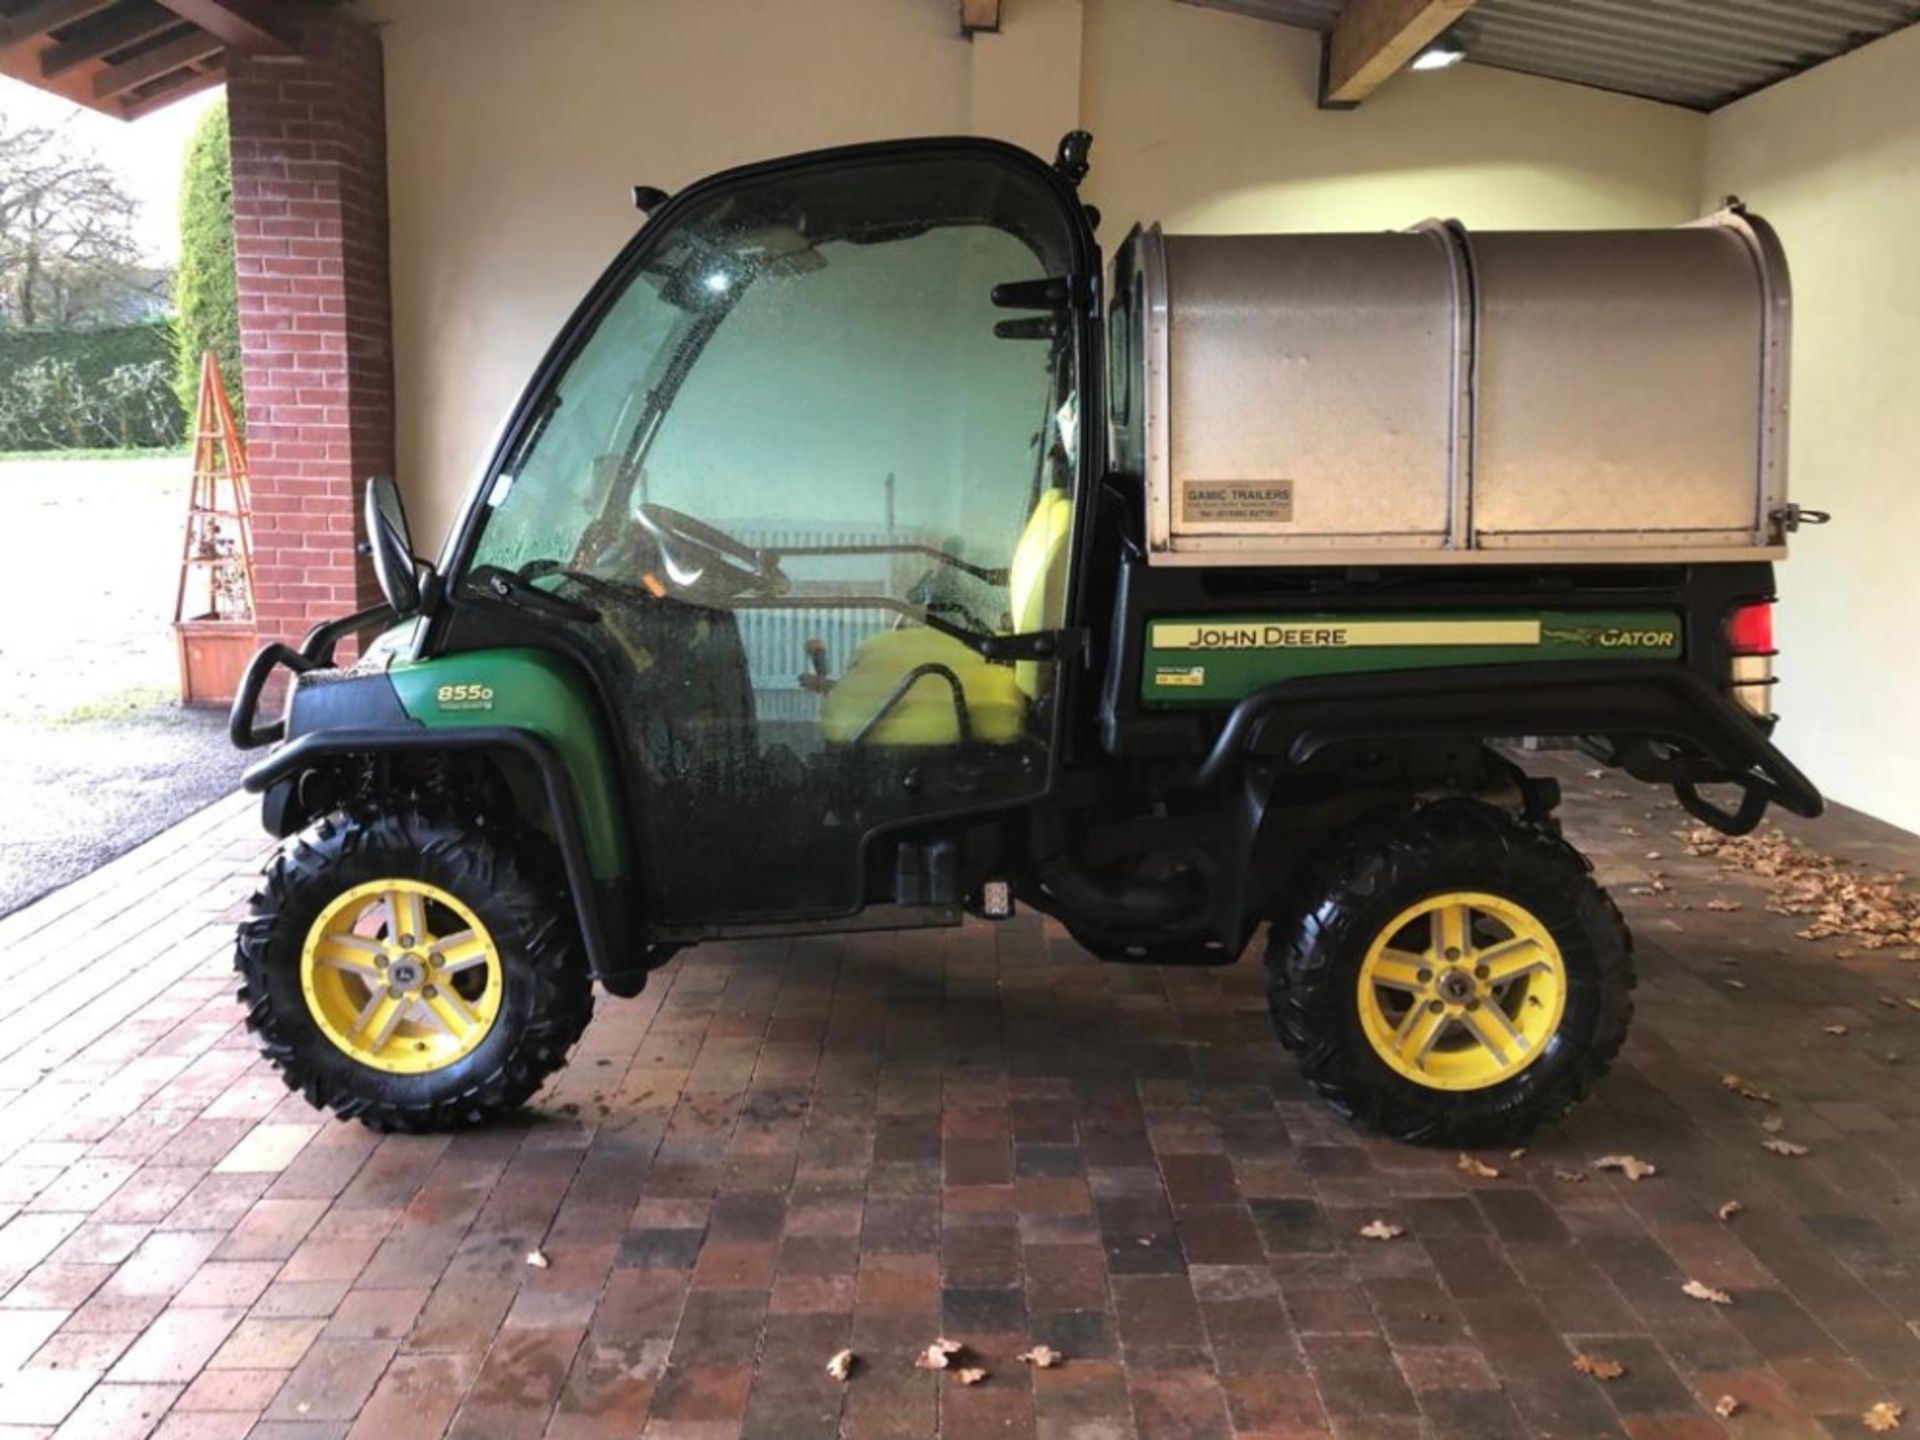 JOHN DEERE 855D GATOR 1263HRS WA14BWL 1 OWNER FROM NEW ROAD LEGAL GLASS DOORS REAR CANOPY - Image 5 of 11